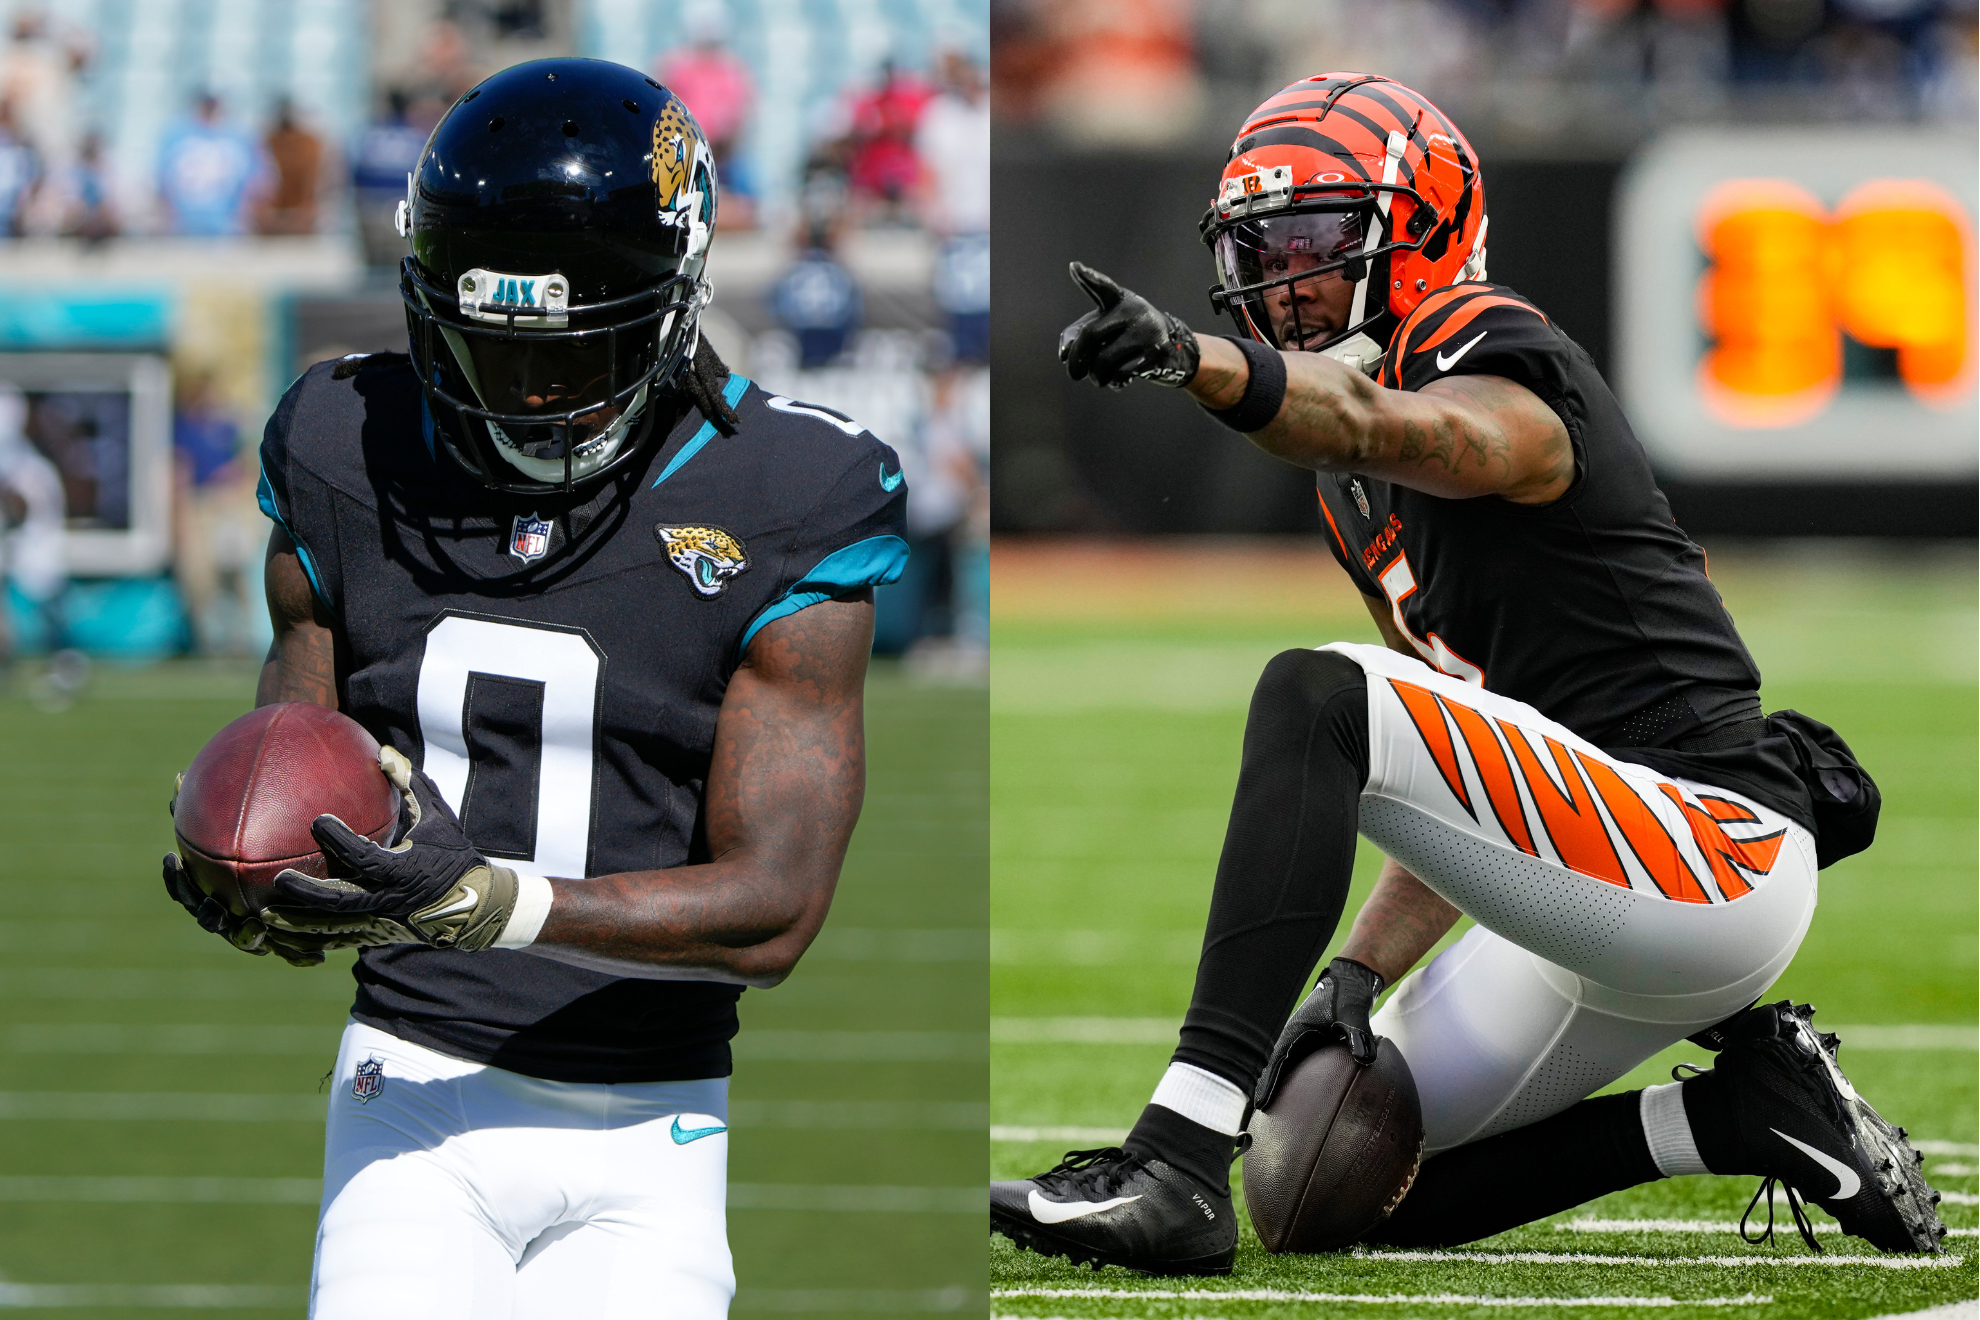 Calvin Ridley (left) and Tee Higgins (right) are two players that Gardner has asked Jets management to sign.